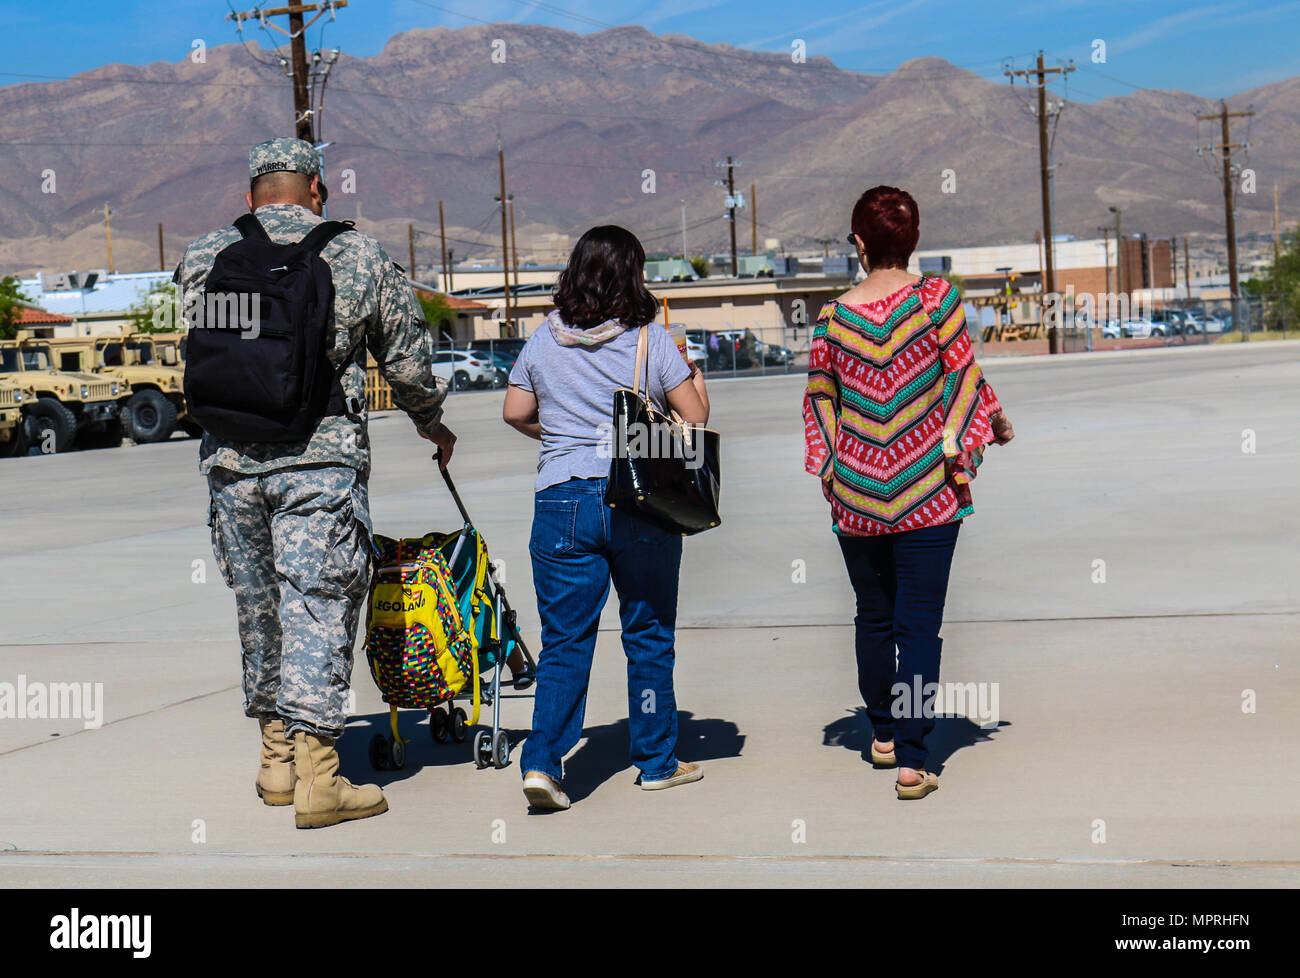 Rustie Milam, Sgt. William Thomas Warren Jr., Nancy Nicole Adame-Warren, and William Ezra Warren, walk back to the Headquarters and Headquarters Battery, 32nd Army Air and Missile Defense Command, Fort Bliss, Texas, April 6, 2017. The goal is to stay ready by assisting families inside and outside the unit’s element. (U.S. Army photo by Sgt. Aura E. Conejos, 32d AAMDC Public Affairs) Stock Photo